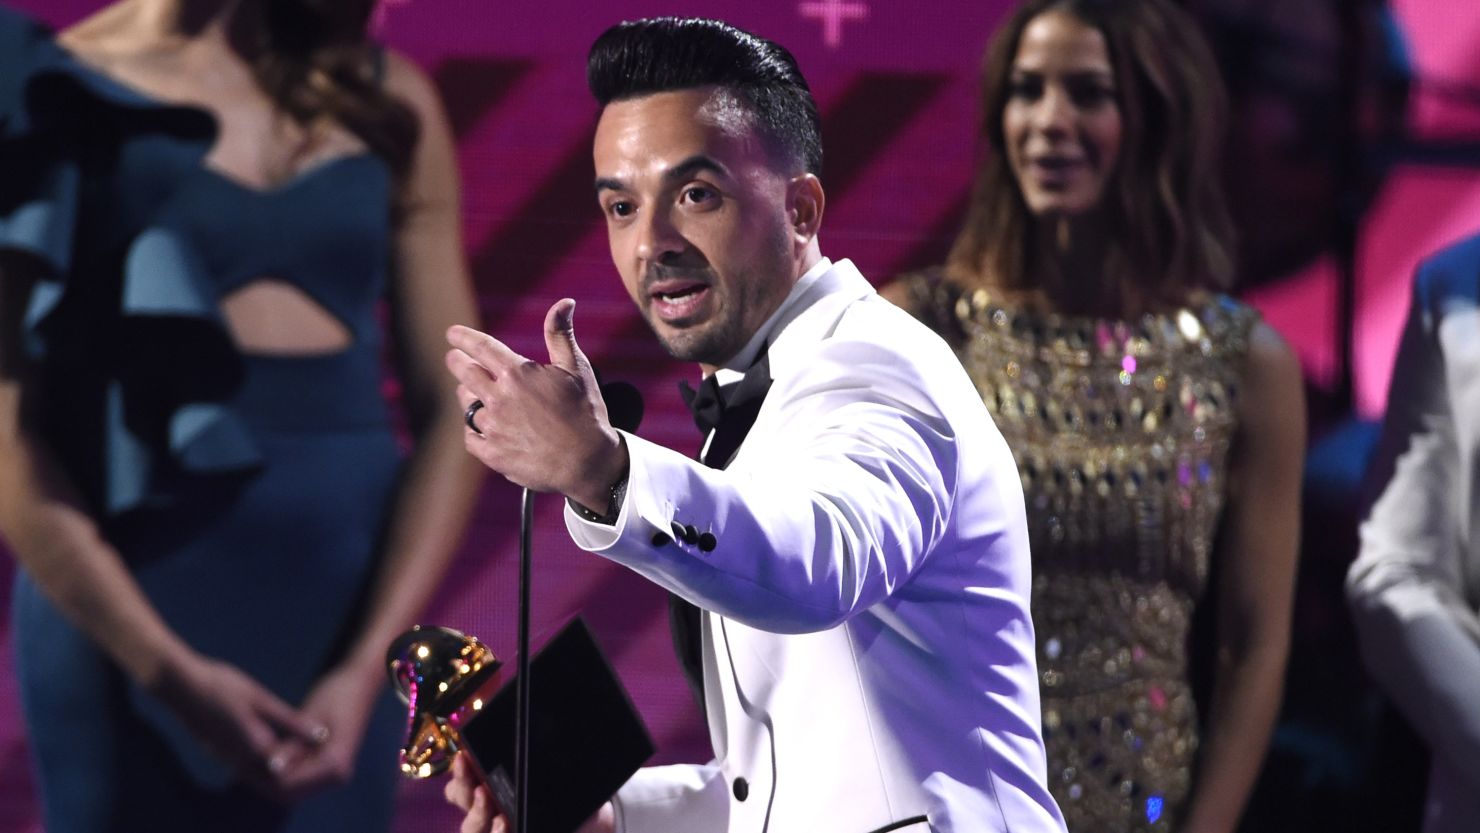 Luis Fonsi accepts the record of the year award for "Despacito" on Thursday night at the Latin Grammys.